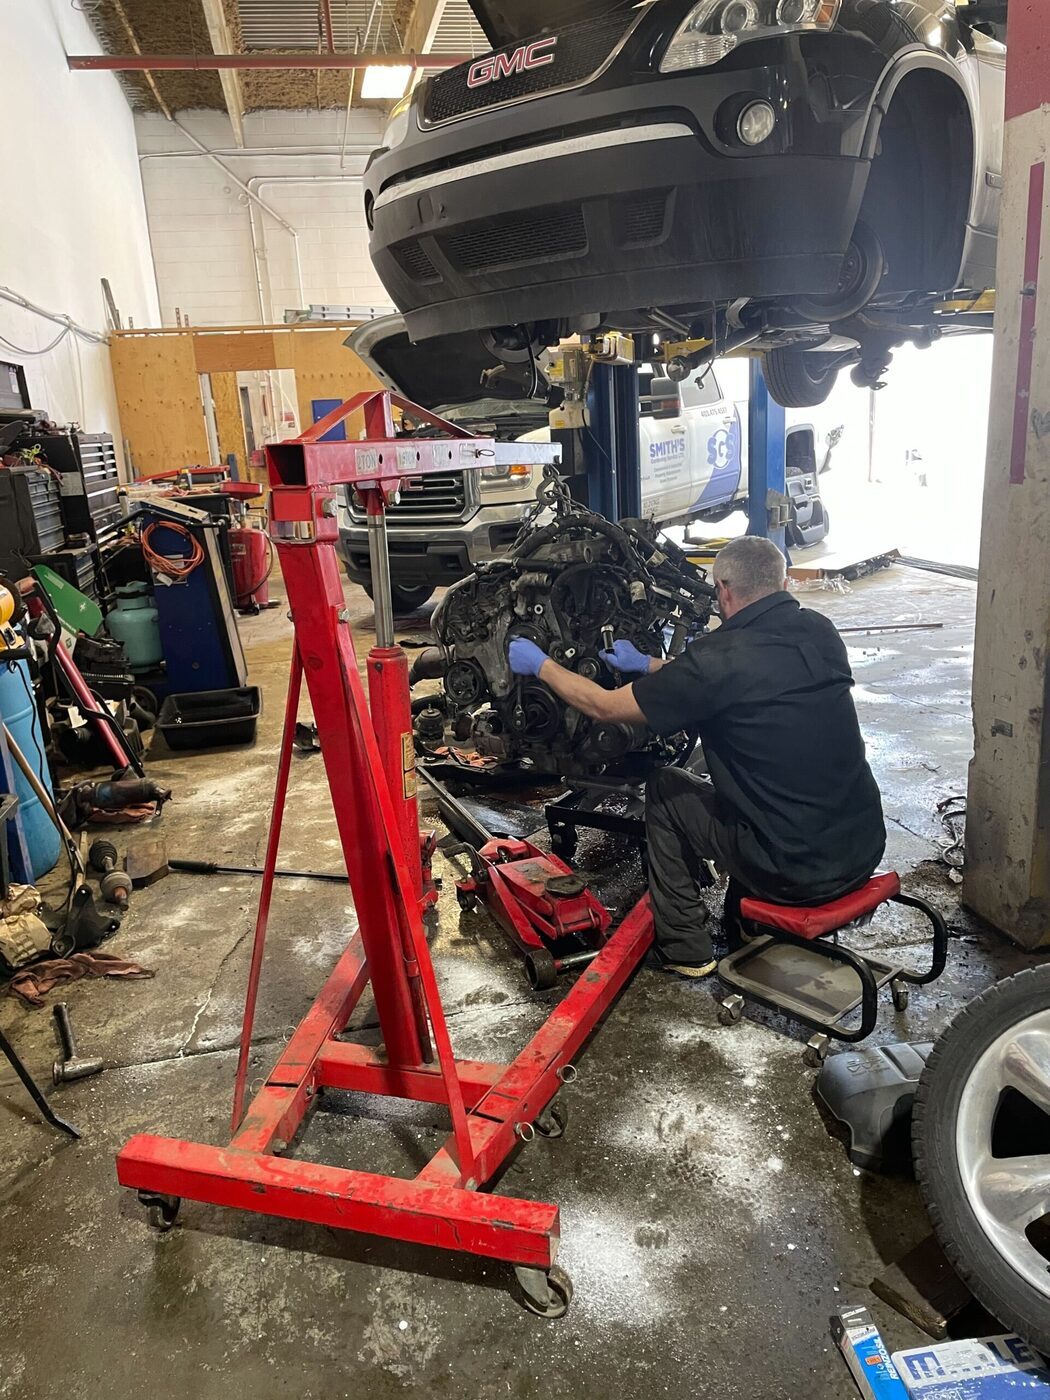 Since its establishment in 2013, the family-owned business has become the trusted name for all kinds of automotive repair services for the people of Calgary and surrounding areas.